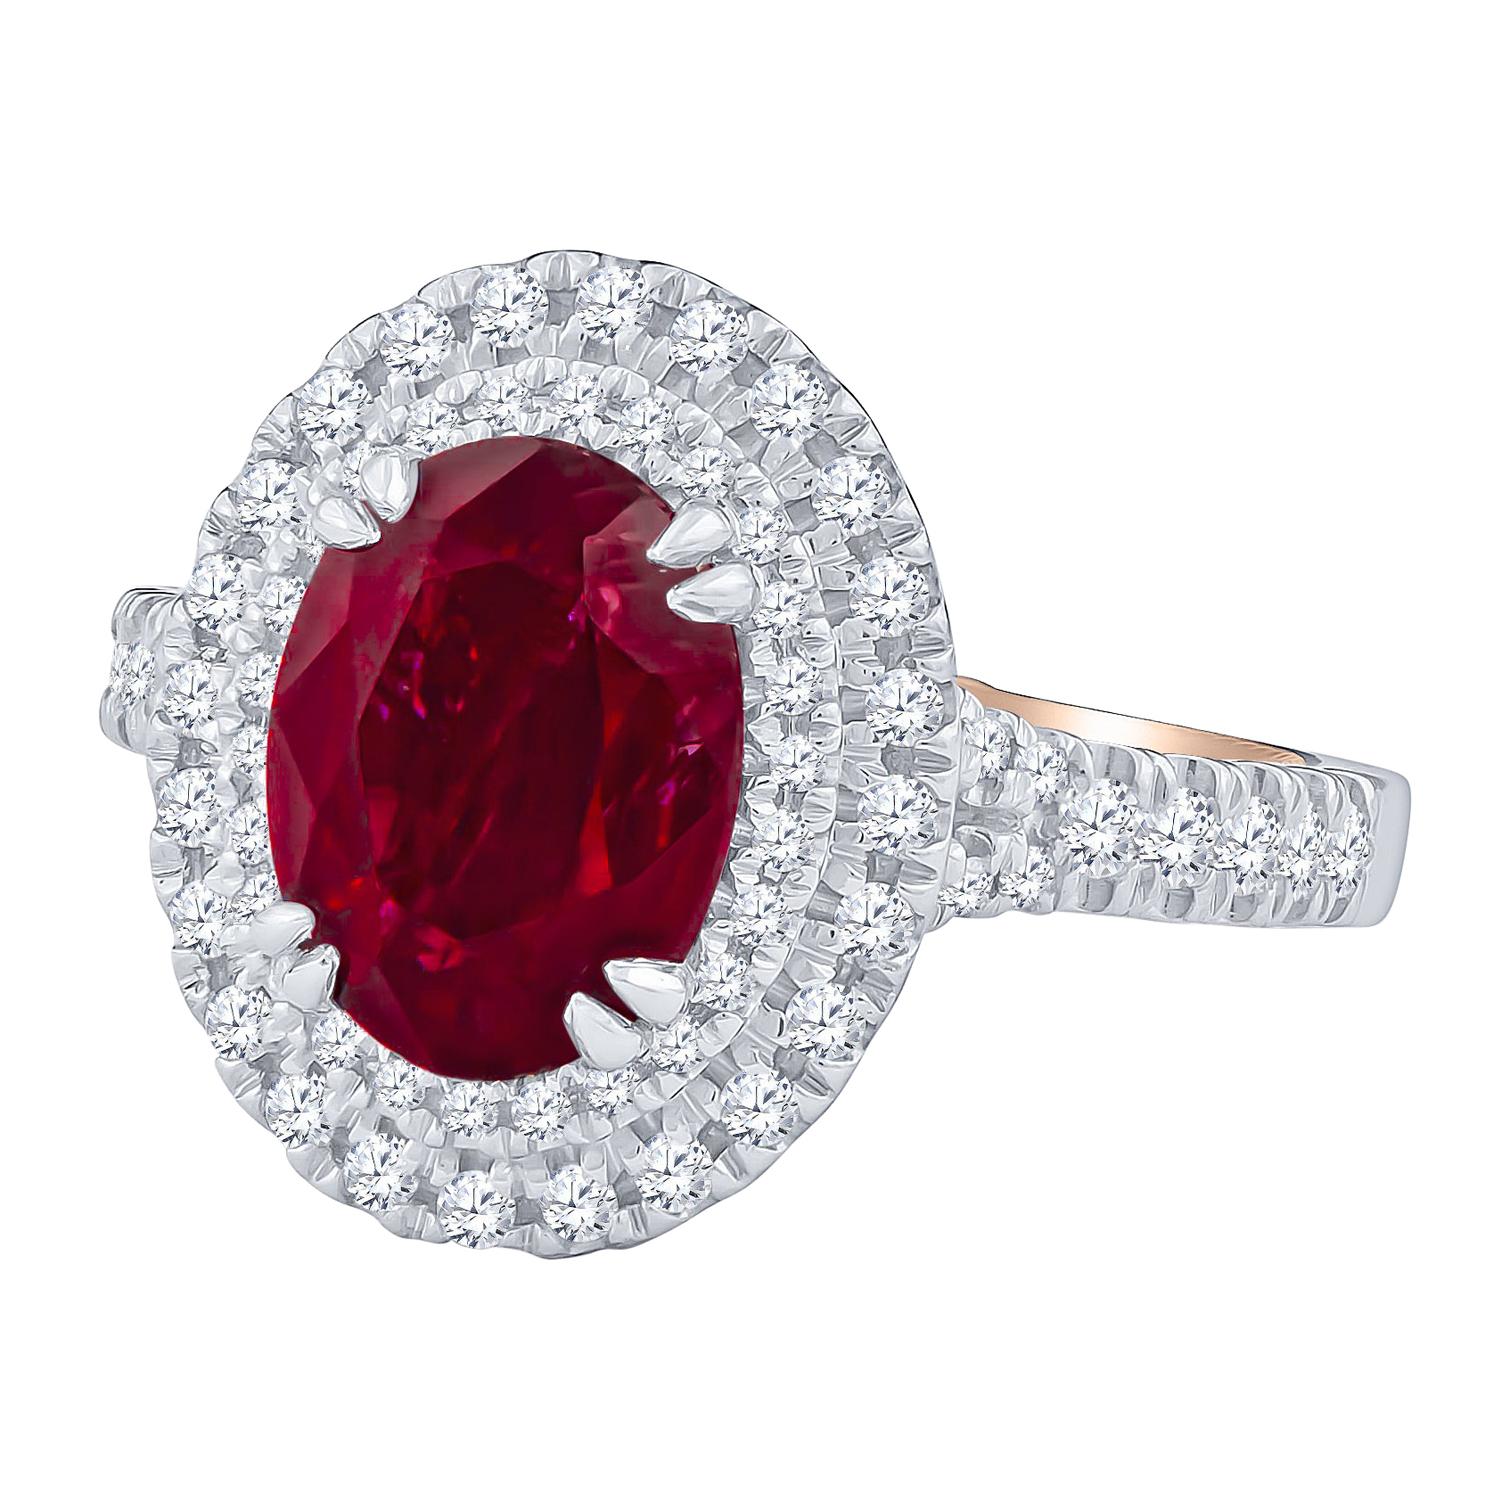 Gorgeous Verragio ring that features a beautiful 2.62 carat oval cut ruby that is centered by a double diamond halo with 0.50 carats total weight of round brilliant cut diamonds. Crafted with a slightly split diamond band in platinum and a beaded